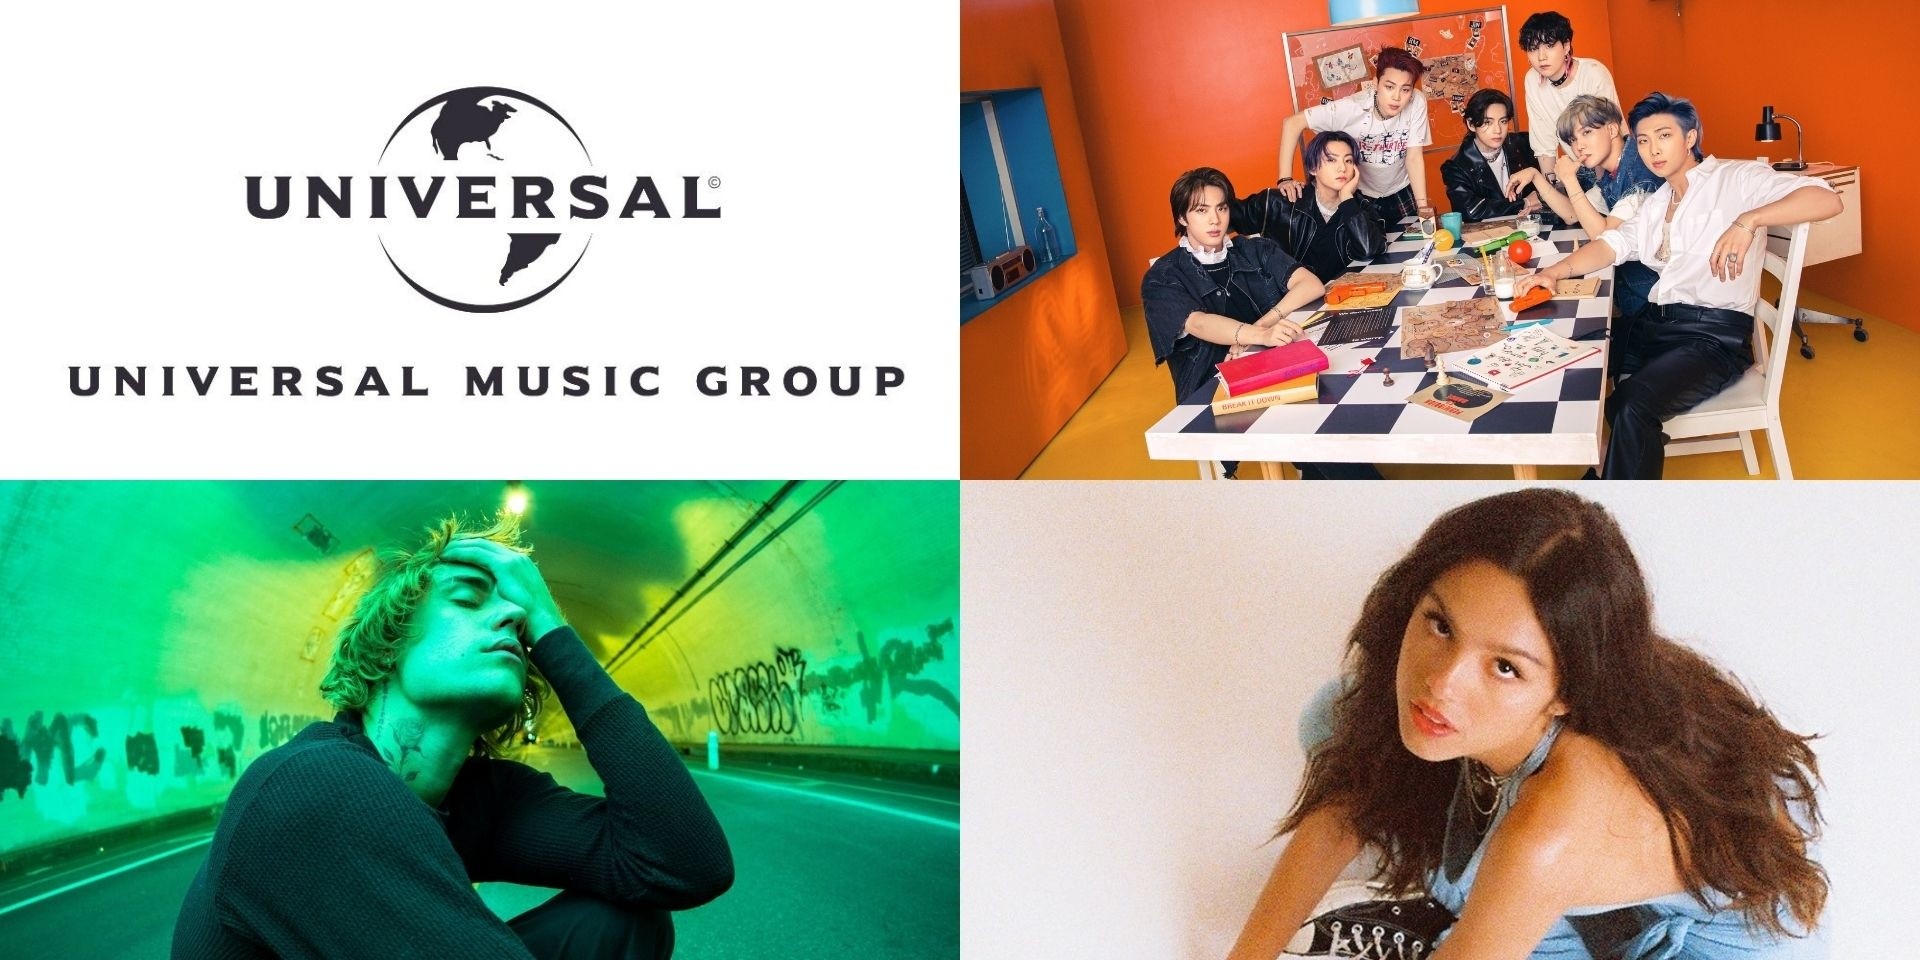 BTS, Justin Bieber, and Olivia Rodrigo are Universal Music Group's top-selling artists earning almost US$1 billion for 2021